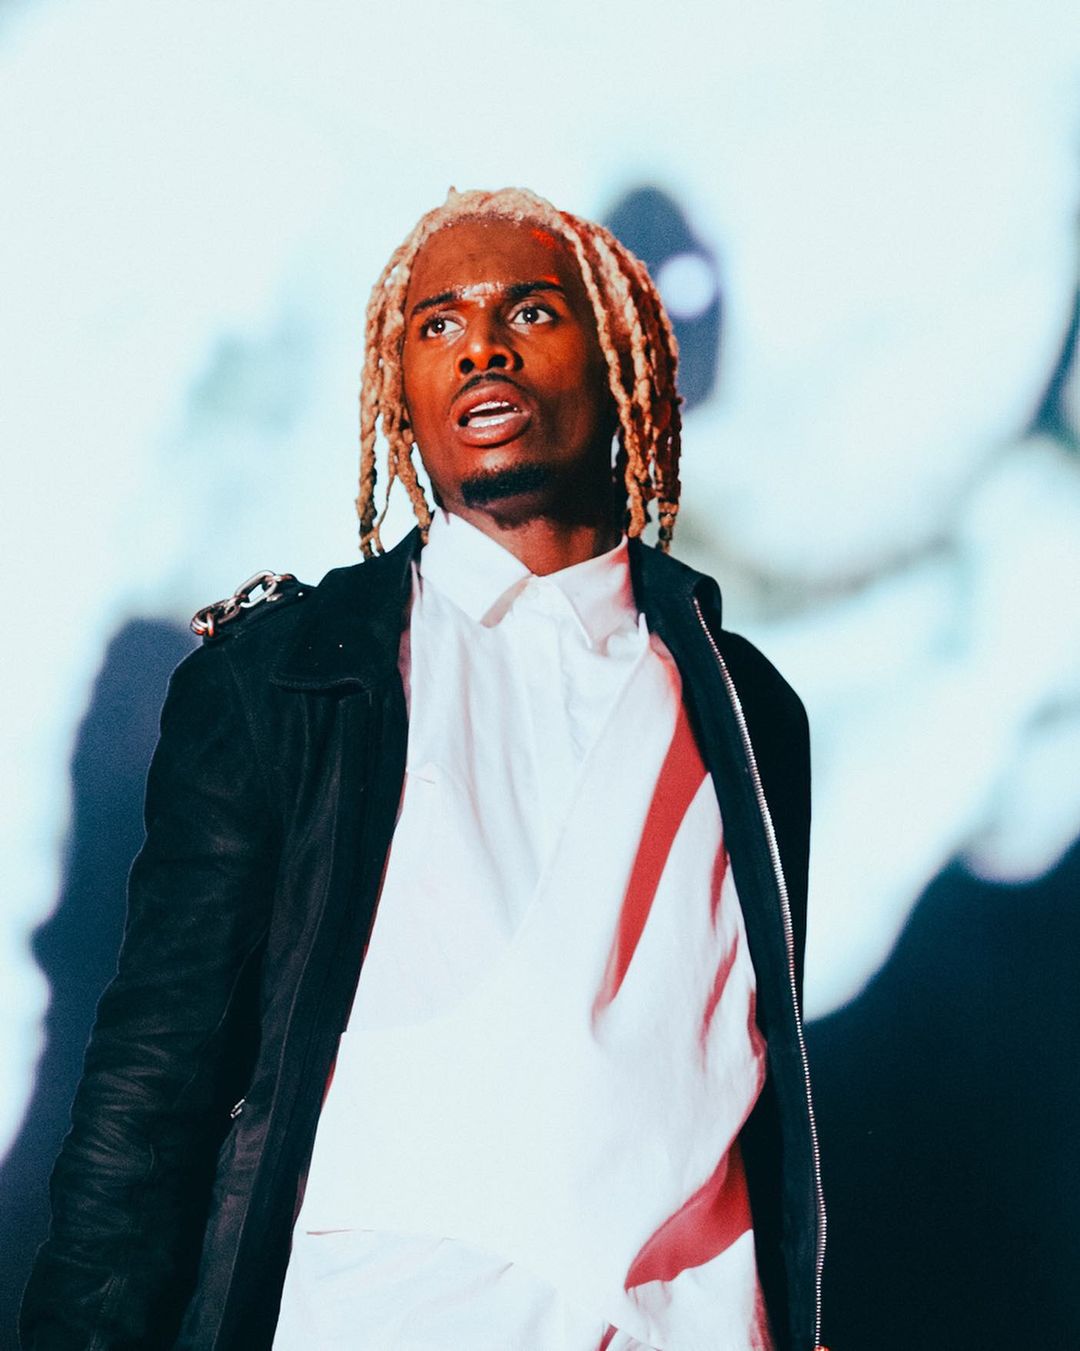 Playboi Carti's Concert Shut Down after Crowd Rushes Stage RapTV